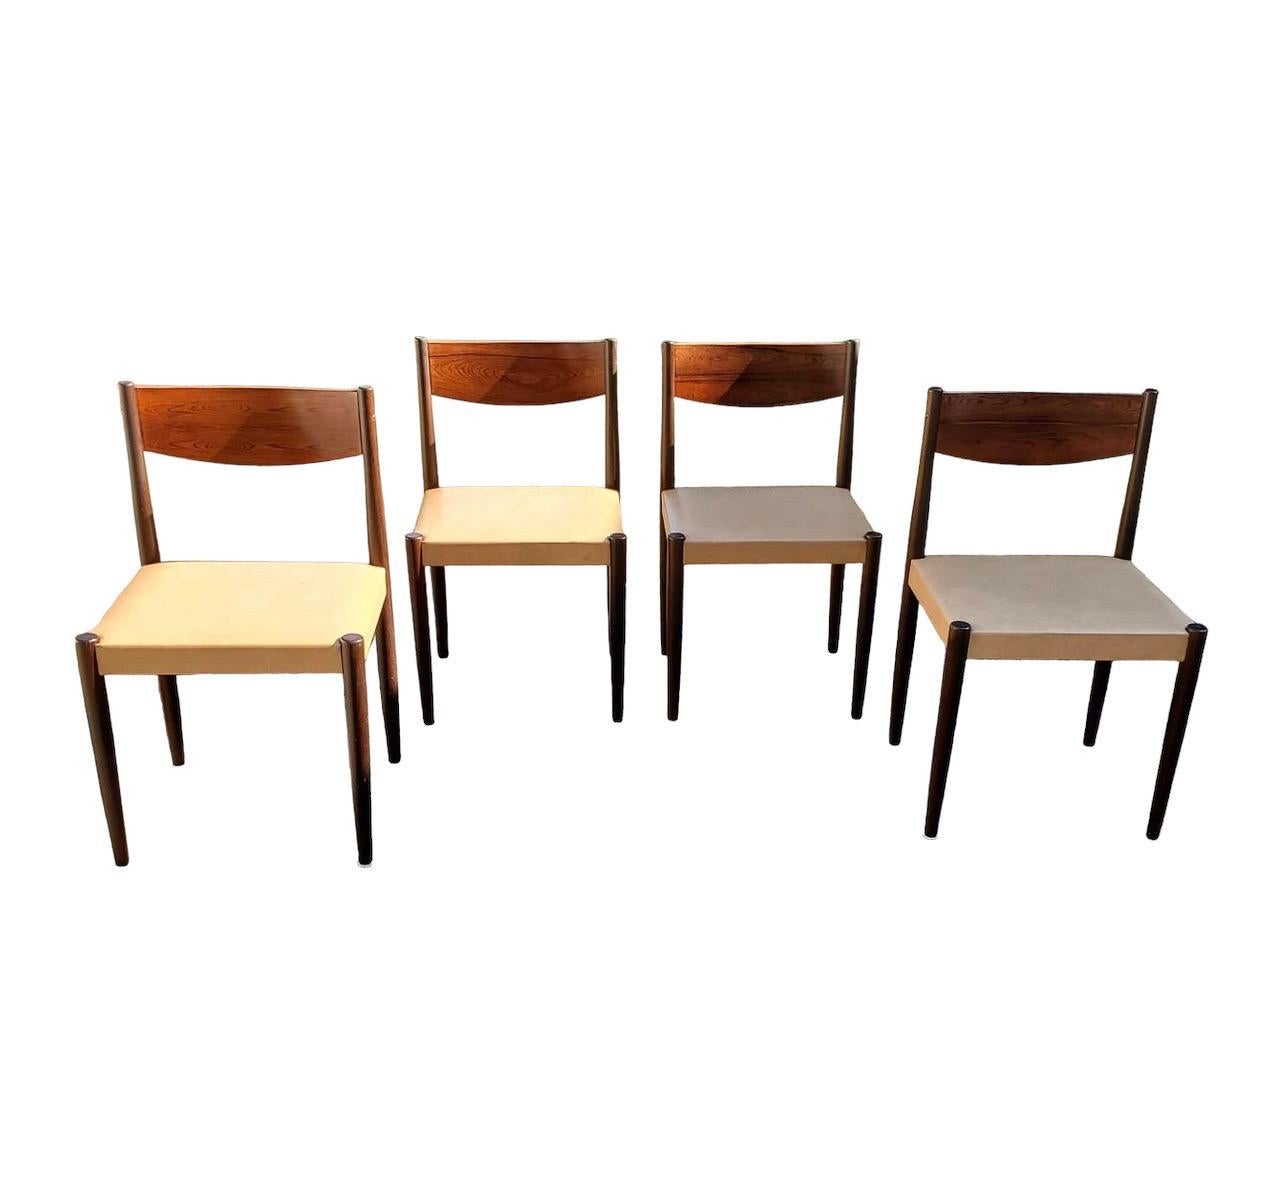 Late 20th Century Vintage Danish Mid Century Modern Rosewood Dining Chair Set by Frem Rojle For Sale